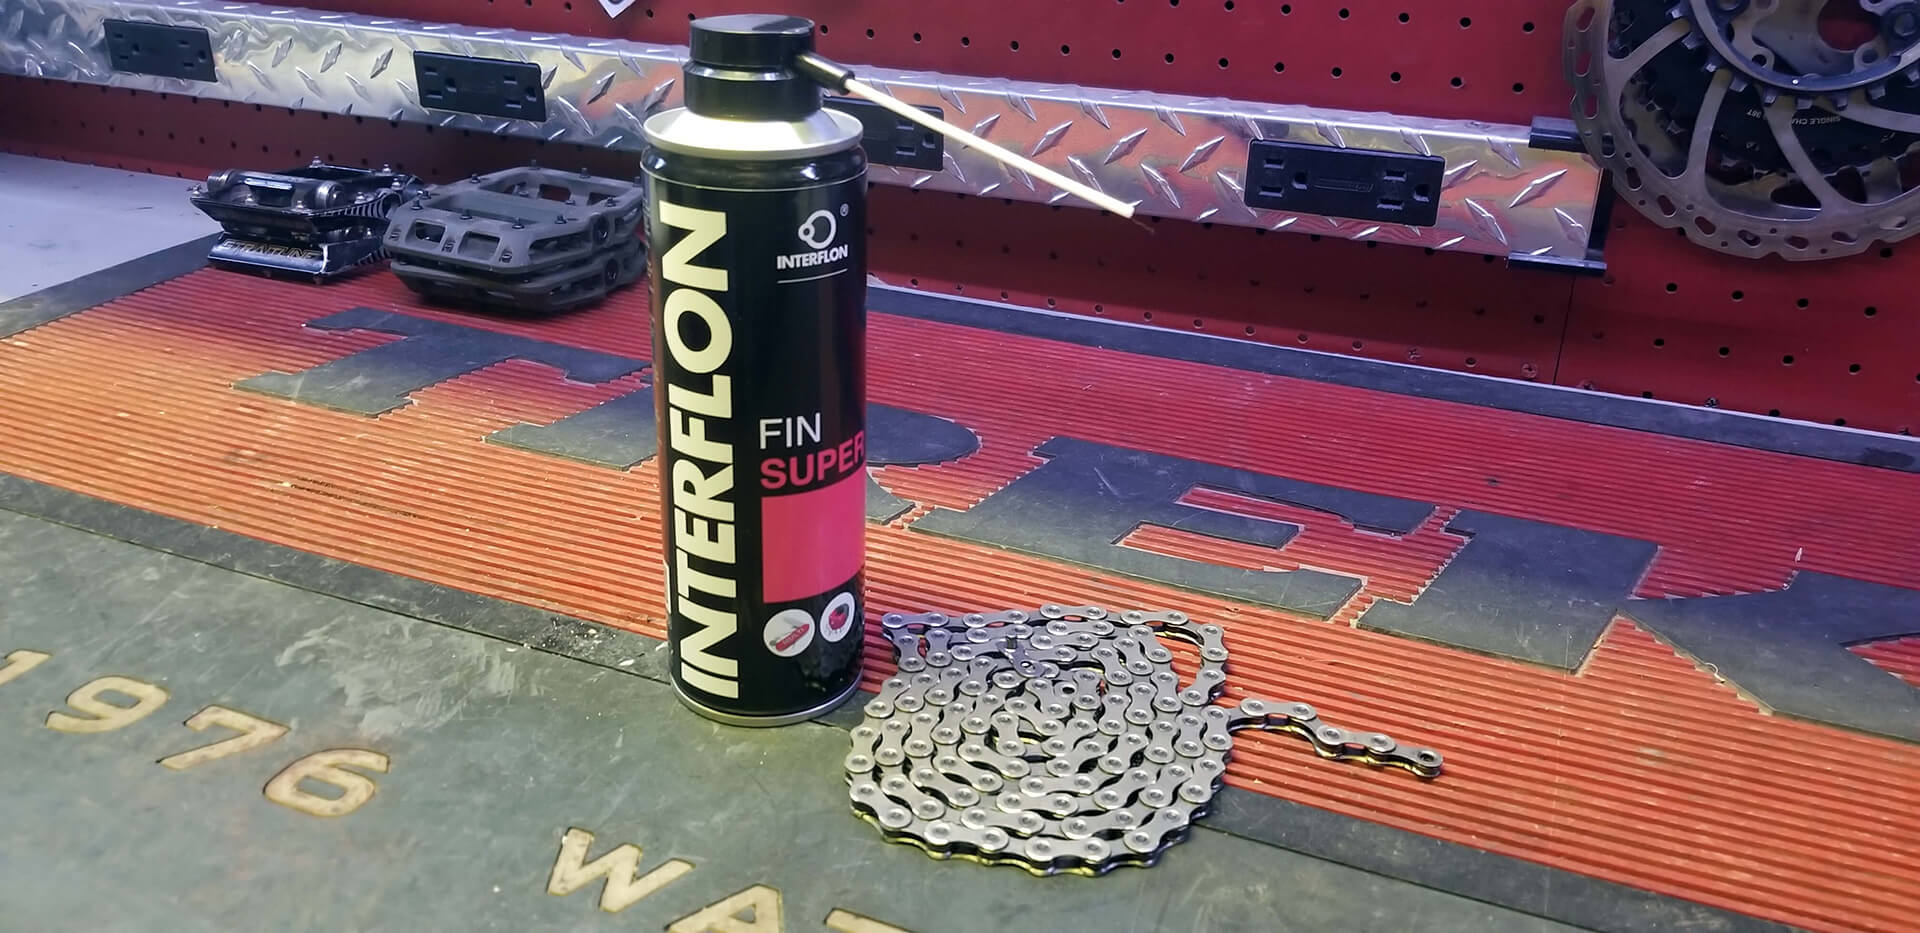 Interflon Fin Super Chain Lubricant. This lubricant is great for bicycle chains and other uses.